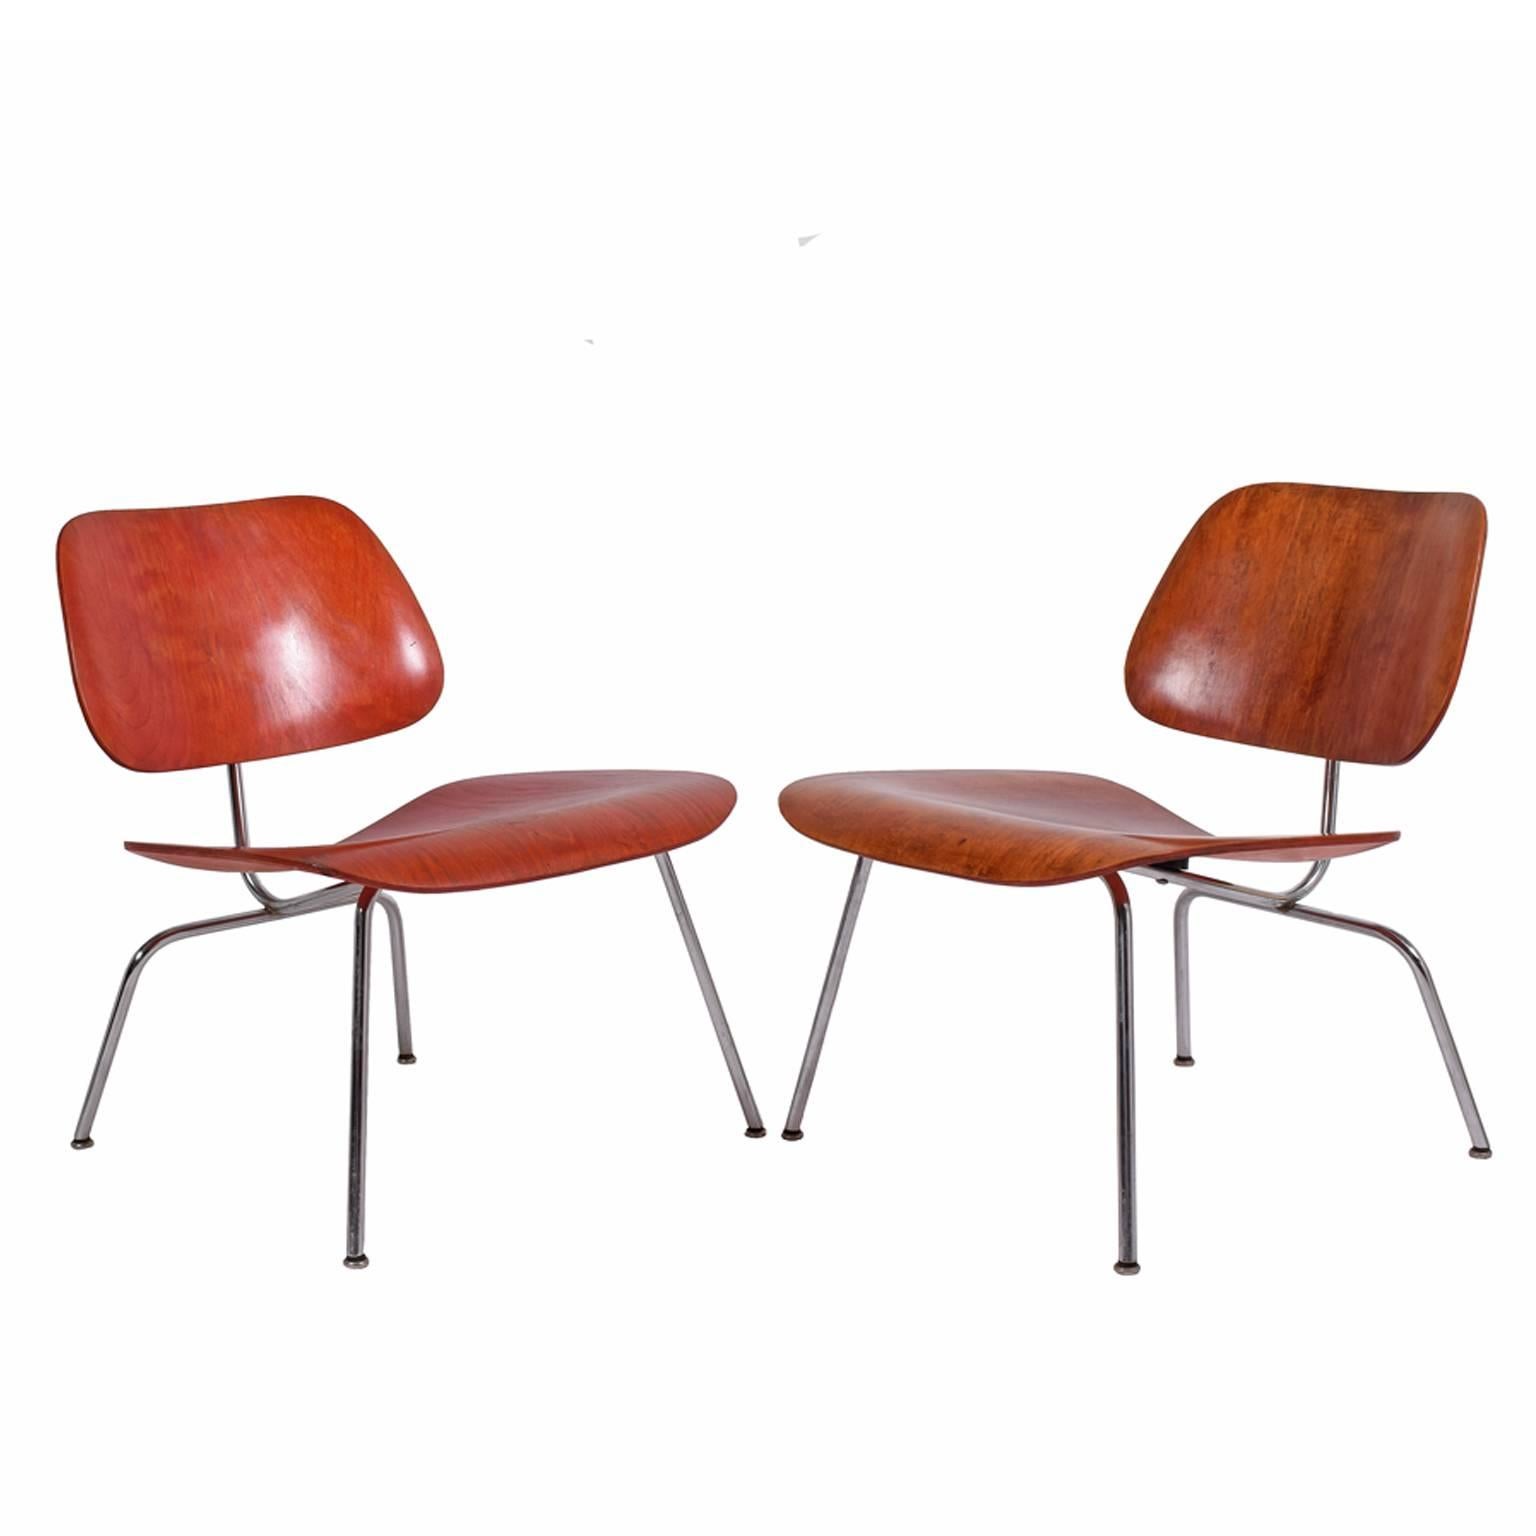 1950s  easy lounge chairs play wood backs and seats on solid steel bases, Early production.
